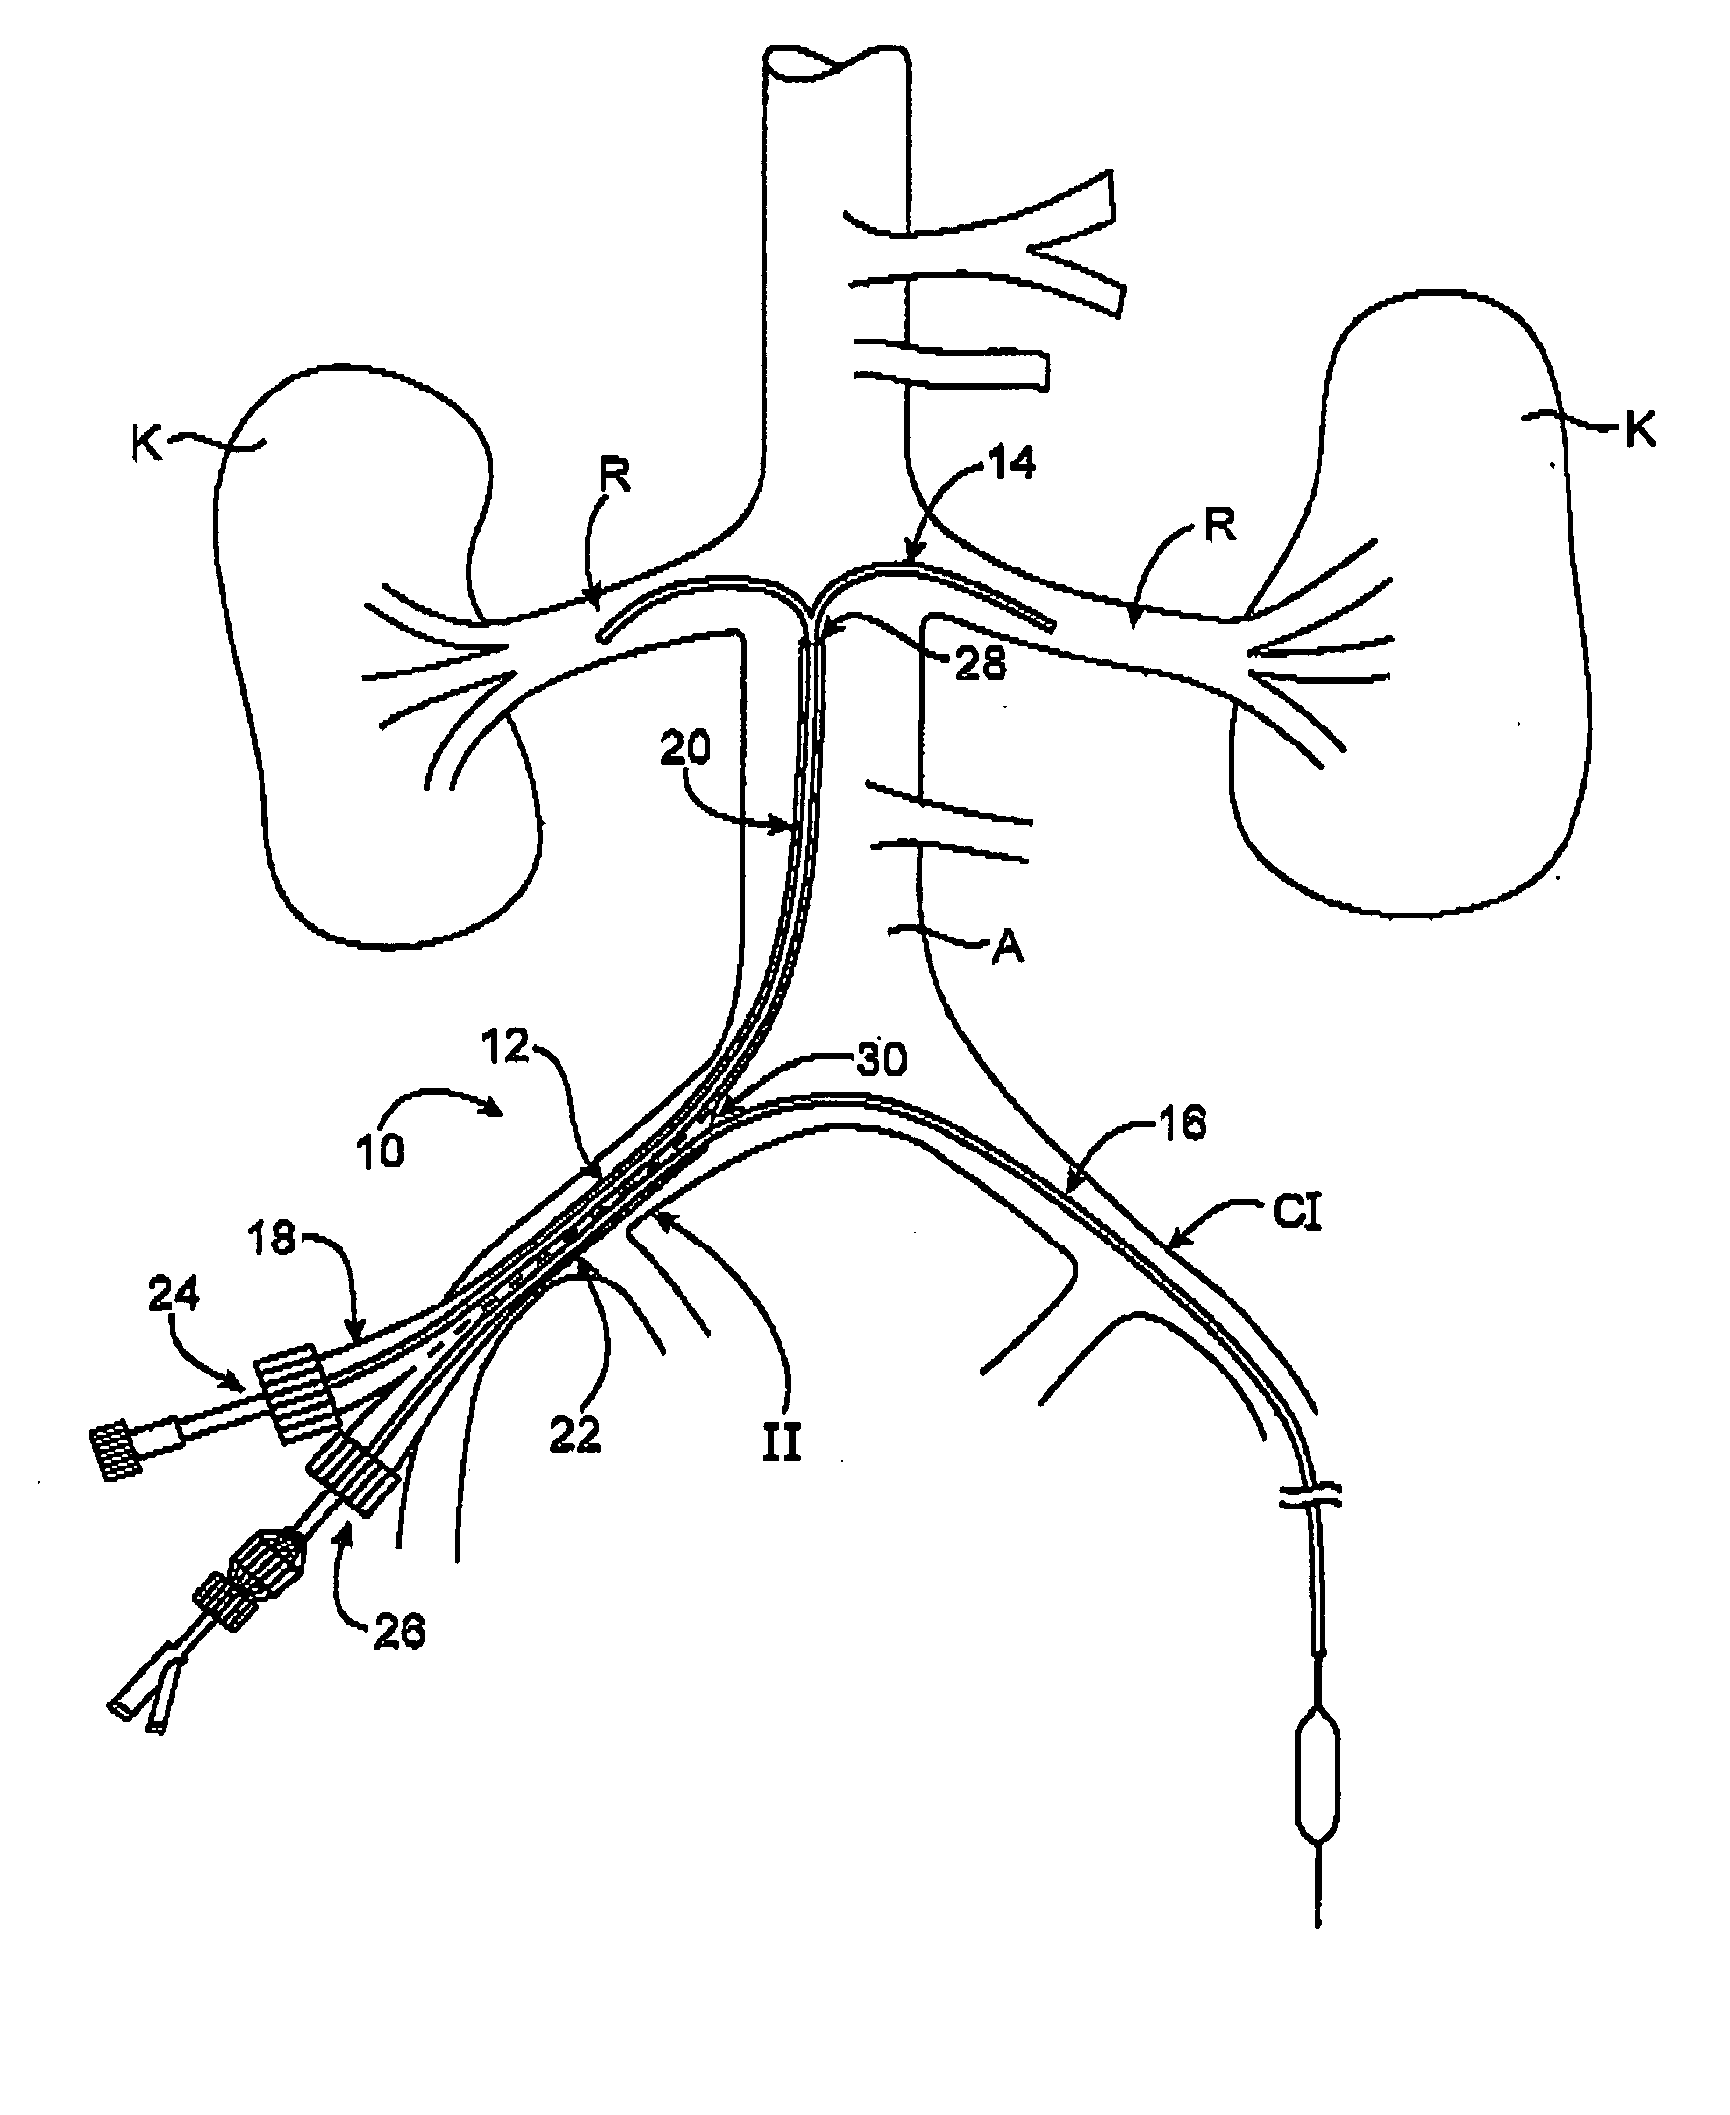 Sheath for use in peripheral interventions